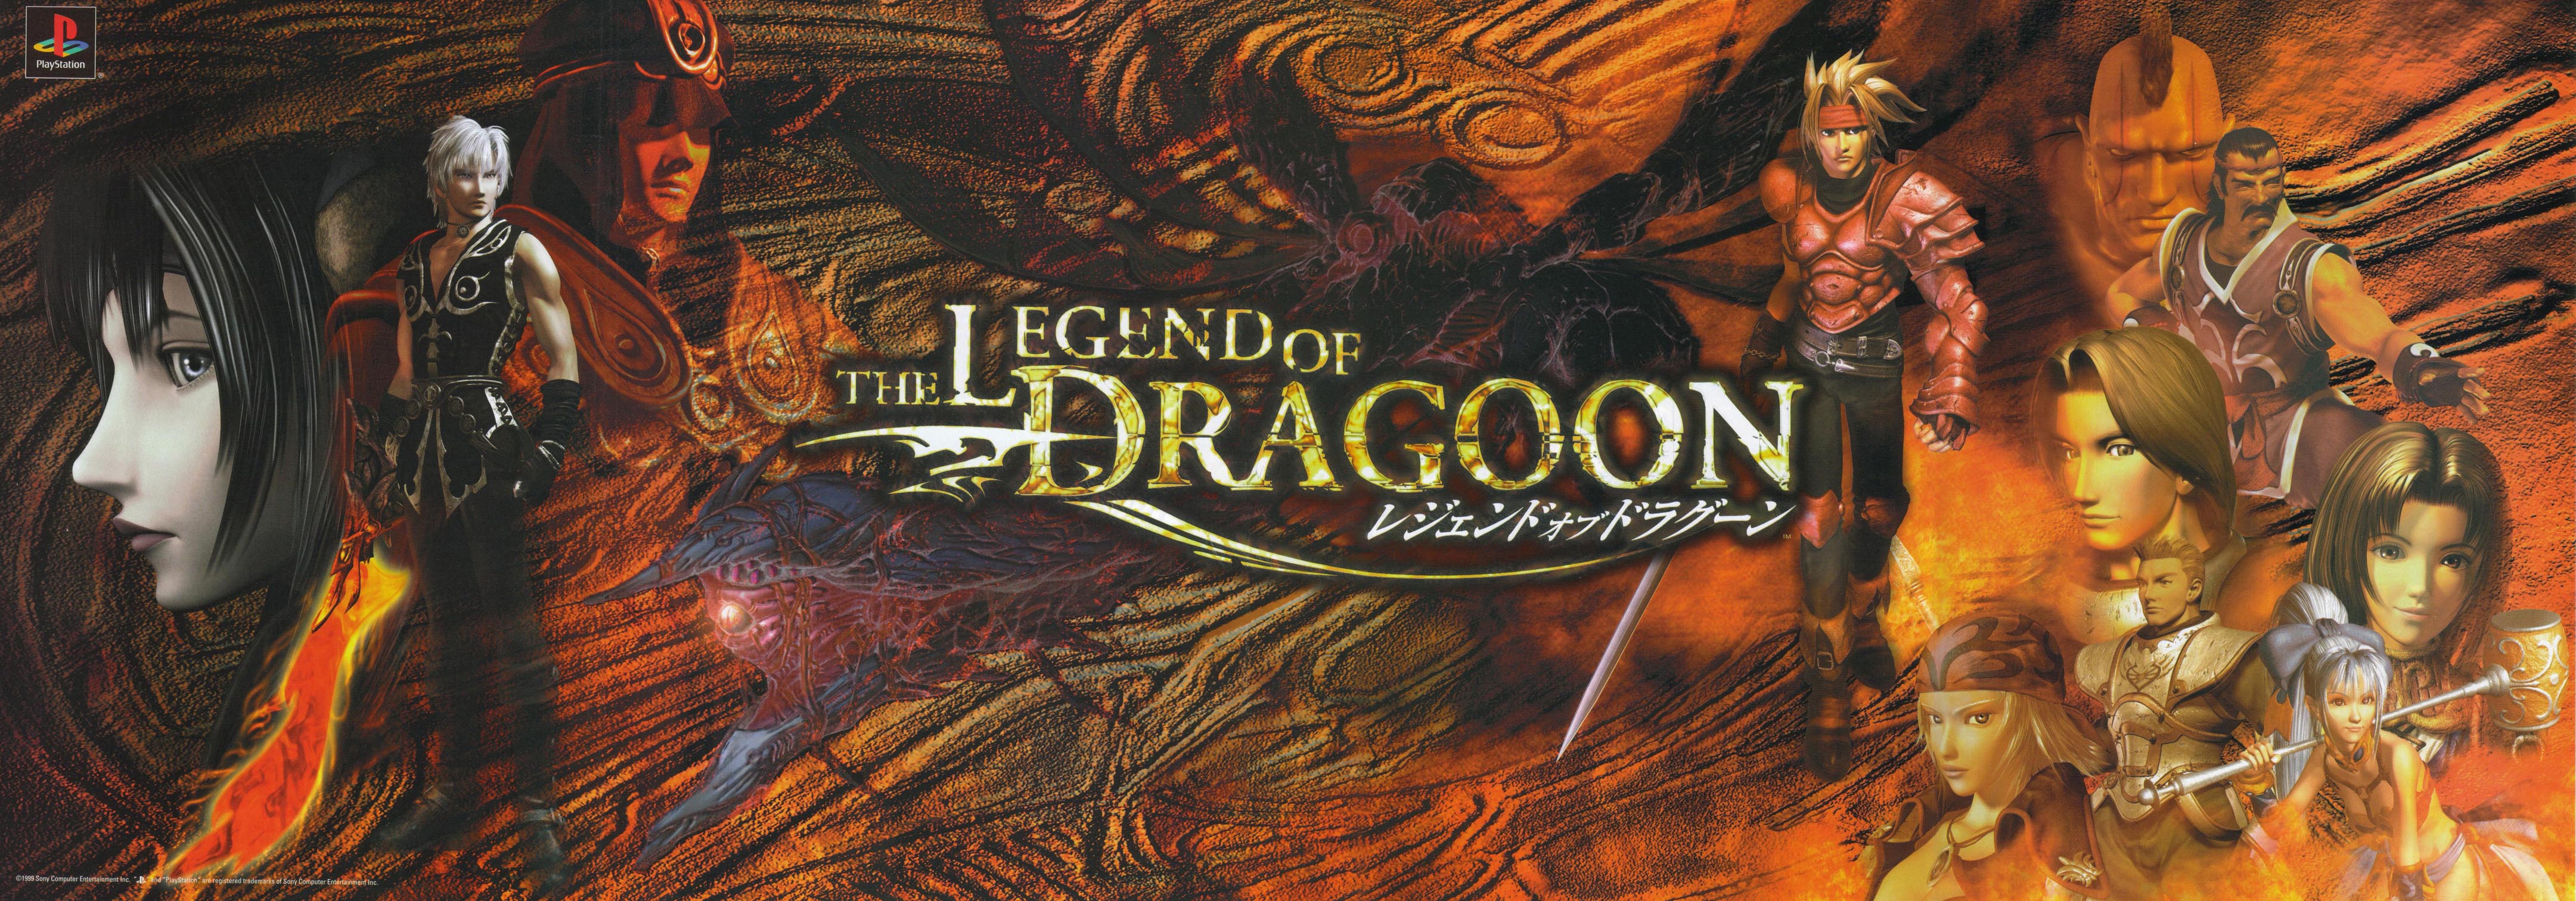 Review | The Legend of Dragoon